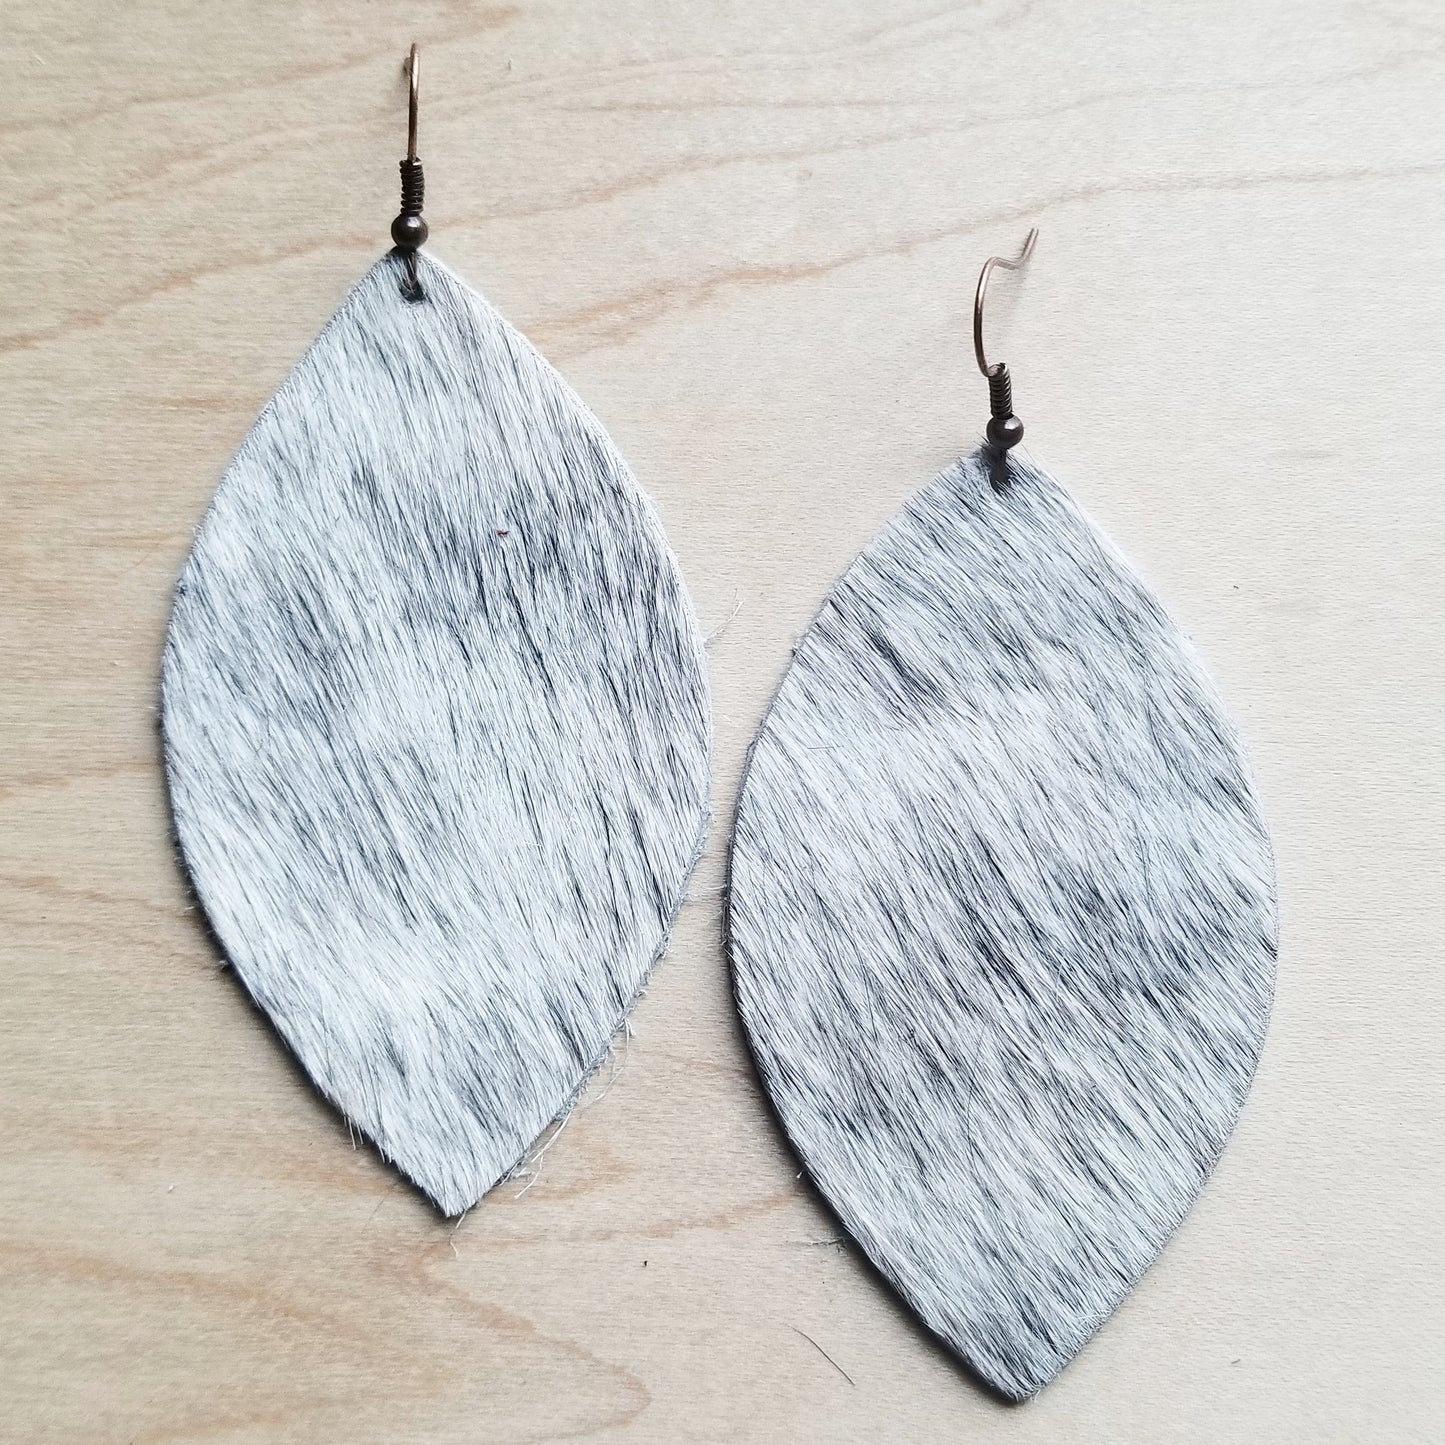 Leather Oval Earrings in White and Gray Hair-on-Hide 221v - The Jewelry Junkie